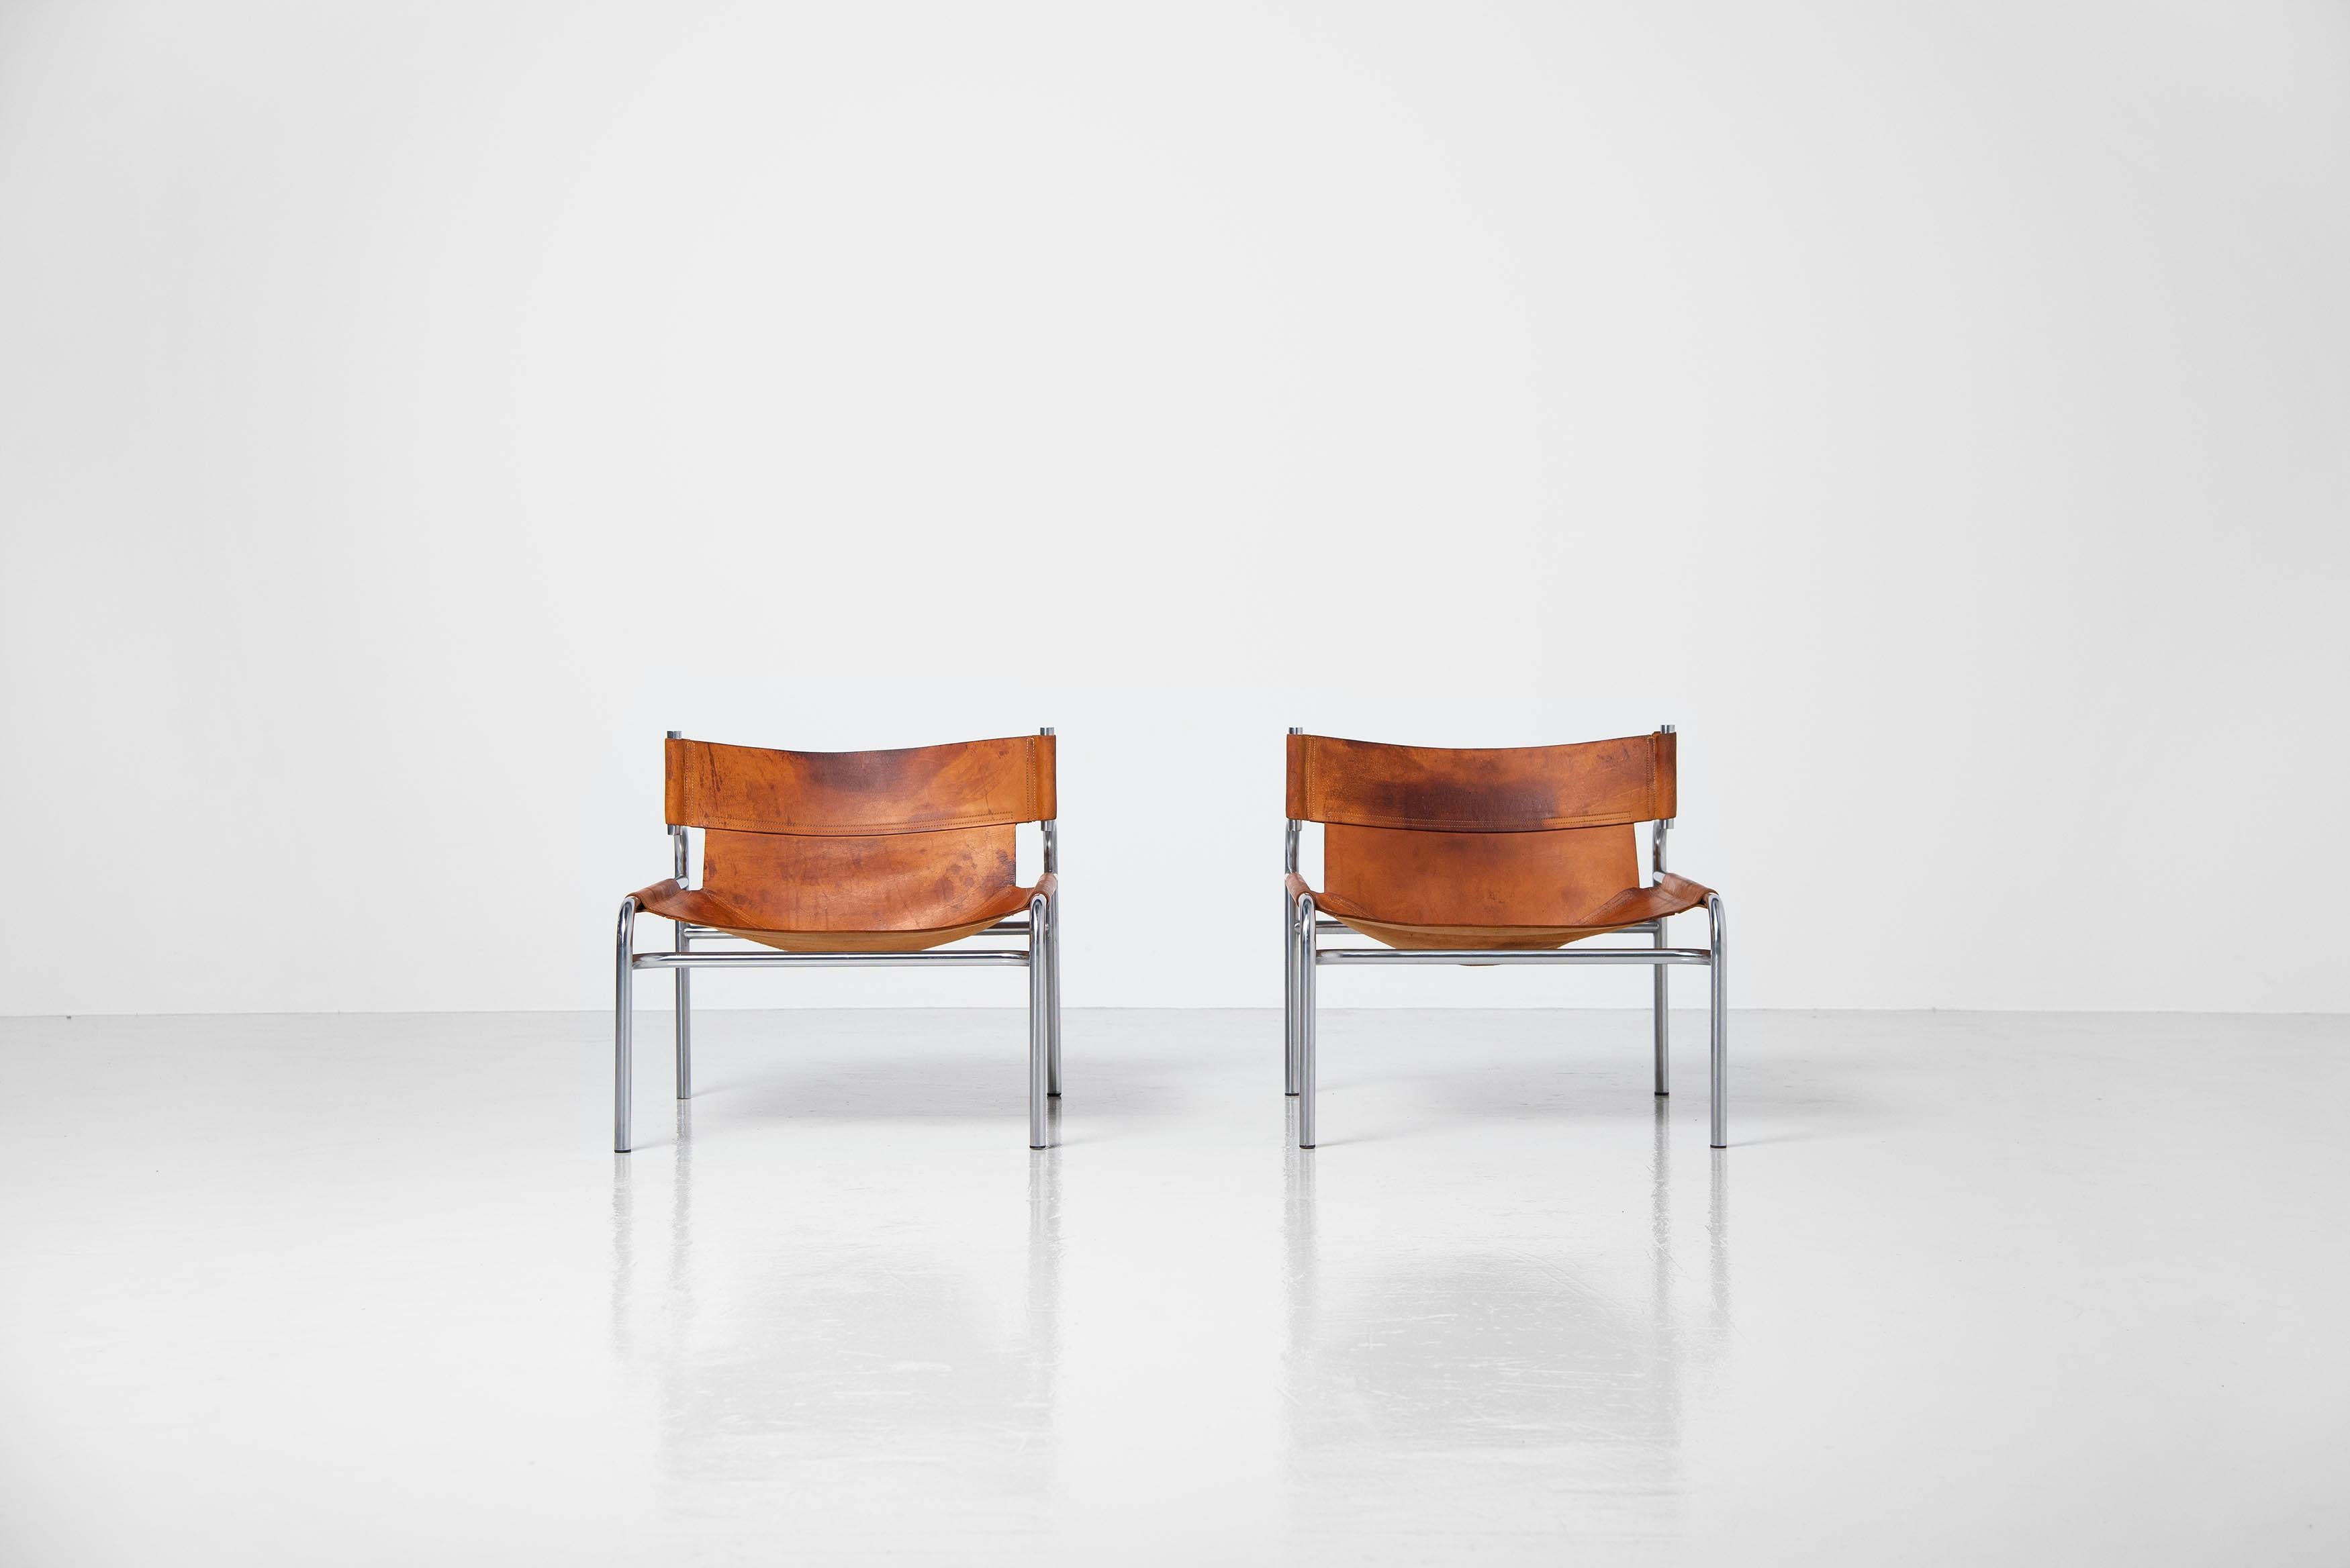 Beautiful patinated pair of low lounge chairs model SZ12 designed by Walter Antonis and manufactured by 't Spectrum Bergeijk, Holland 1971. These chairs were in the collection from 1971-1974, so not many were made. These very nice and unusual shaped